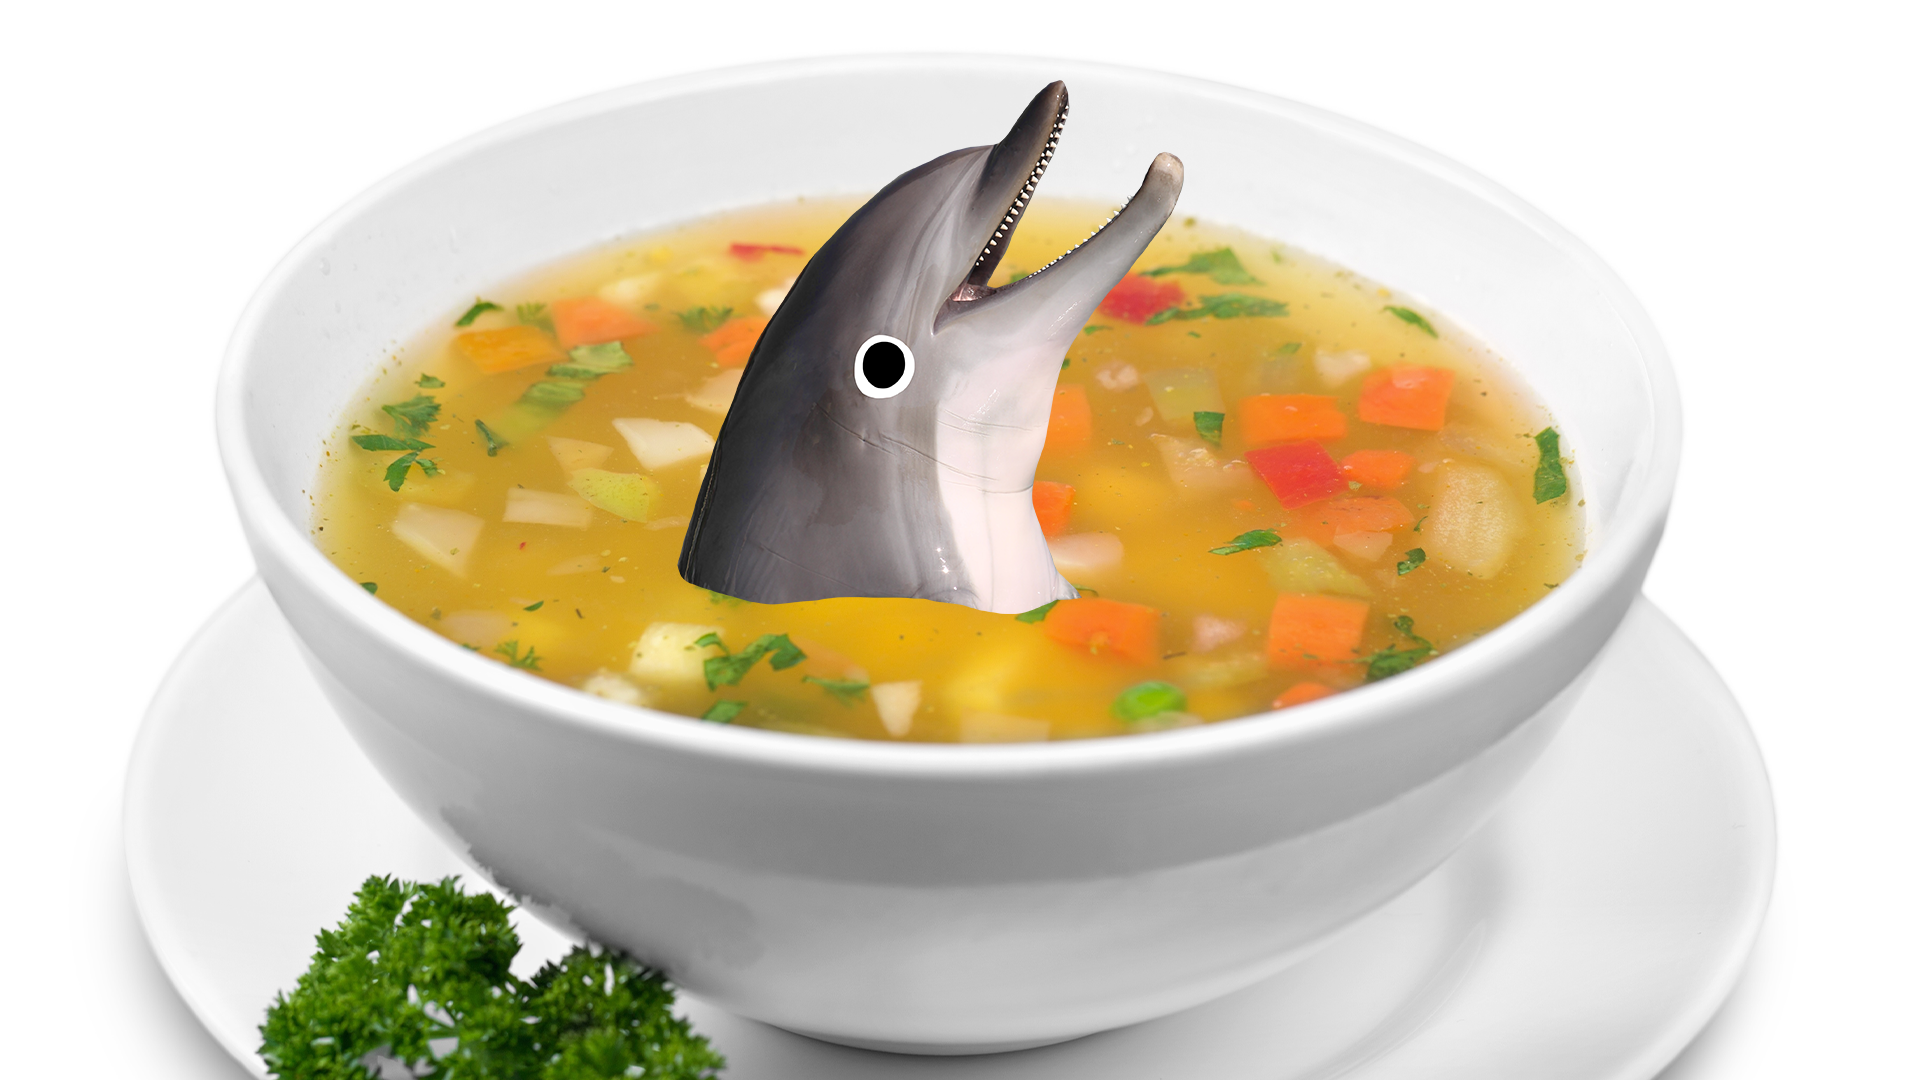 Dolphin popping out of a bowl of soup